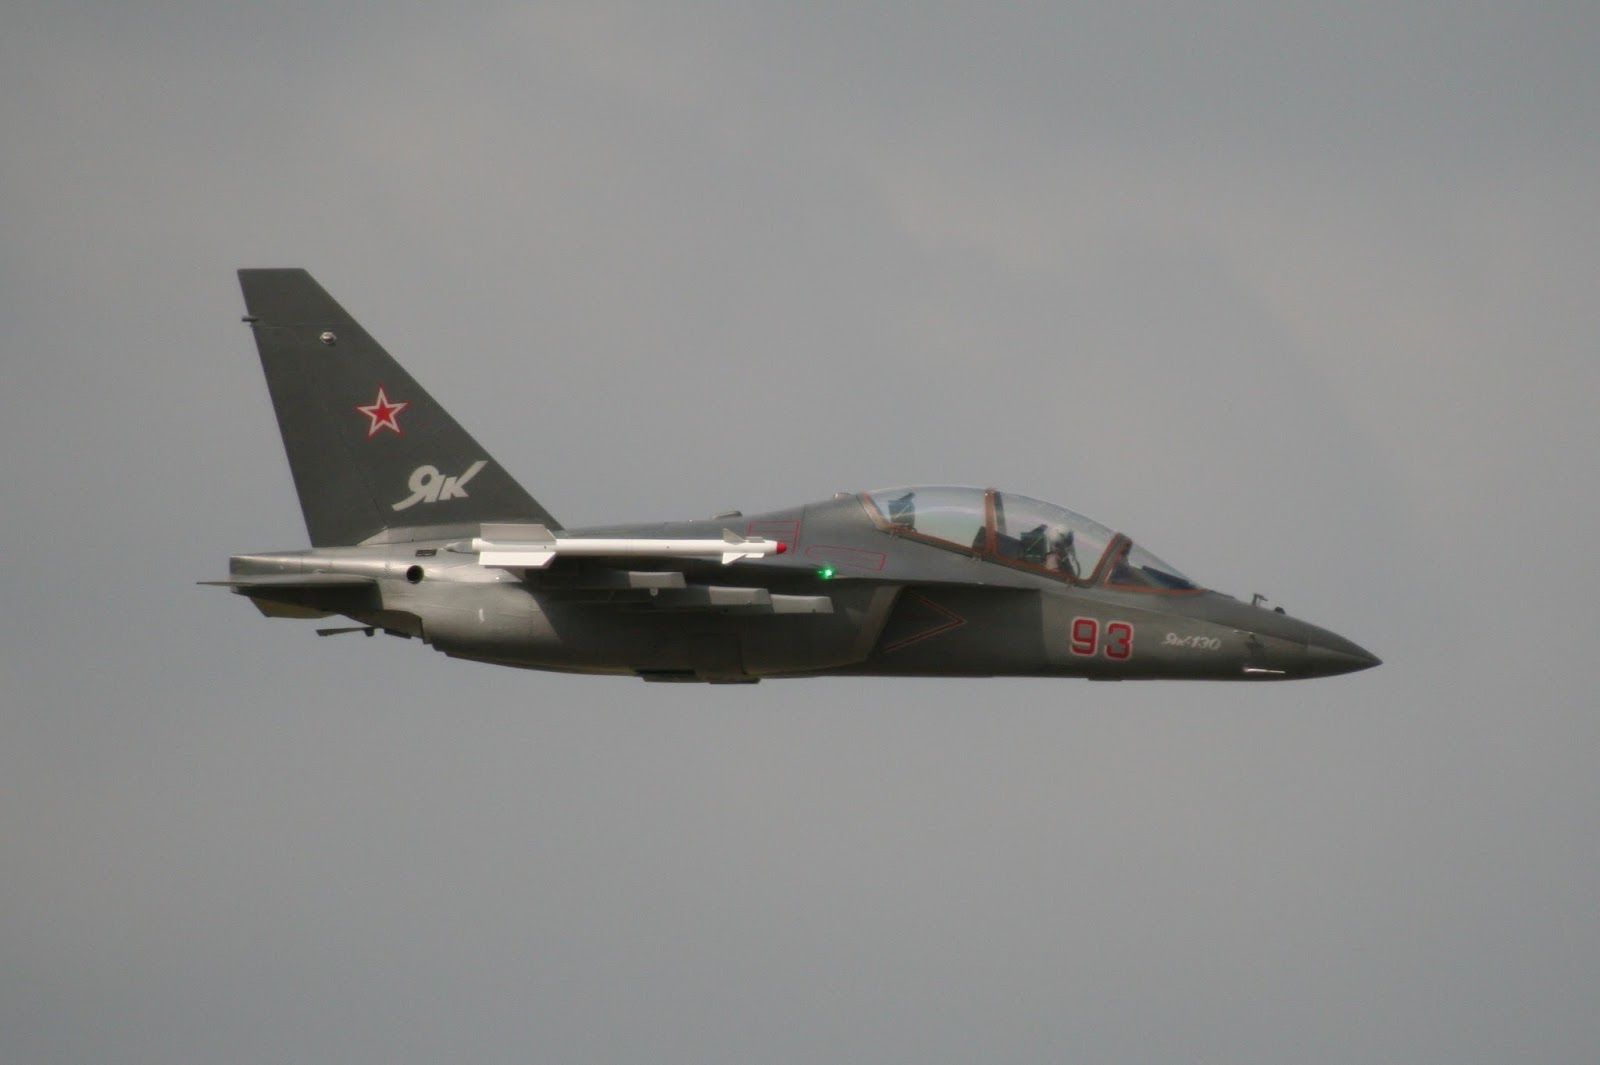 Yakovlev Yak-130 Backgrounds, Compatible - PC, Mobile, Gadgets| 1600x1065 px